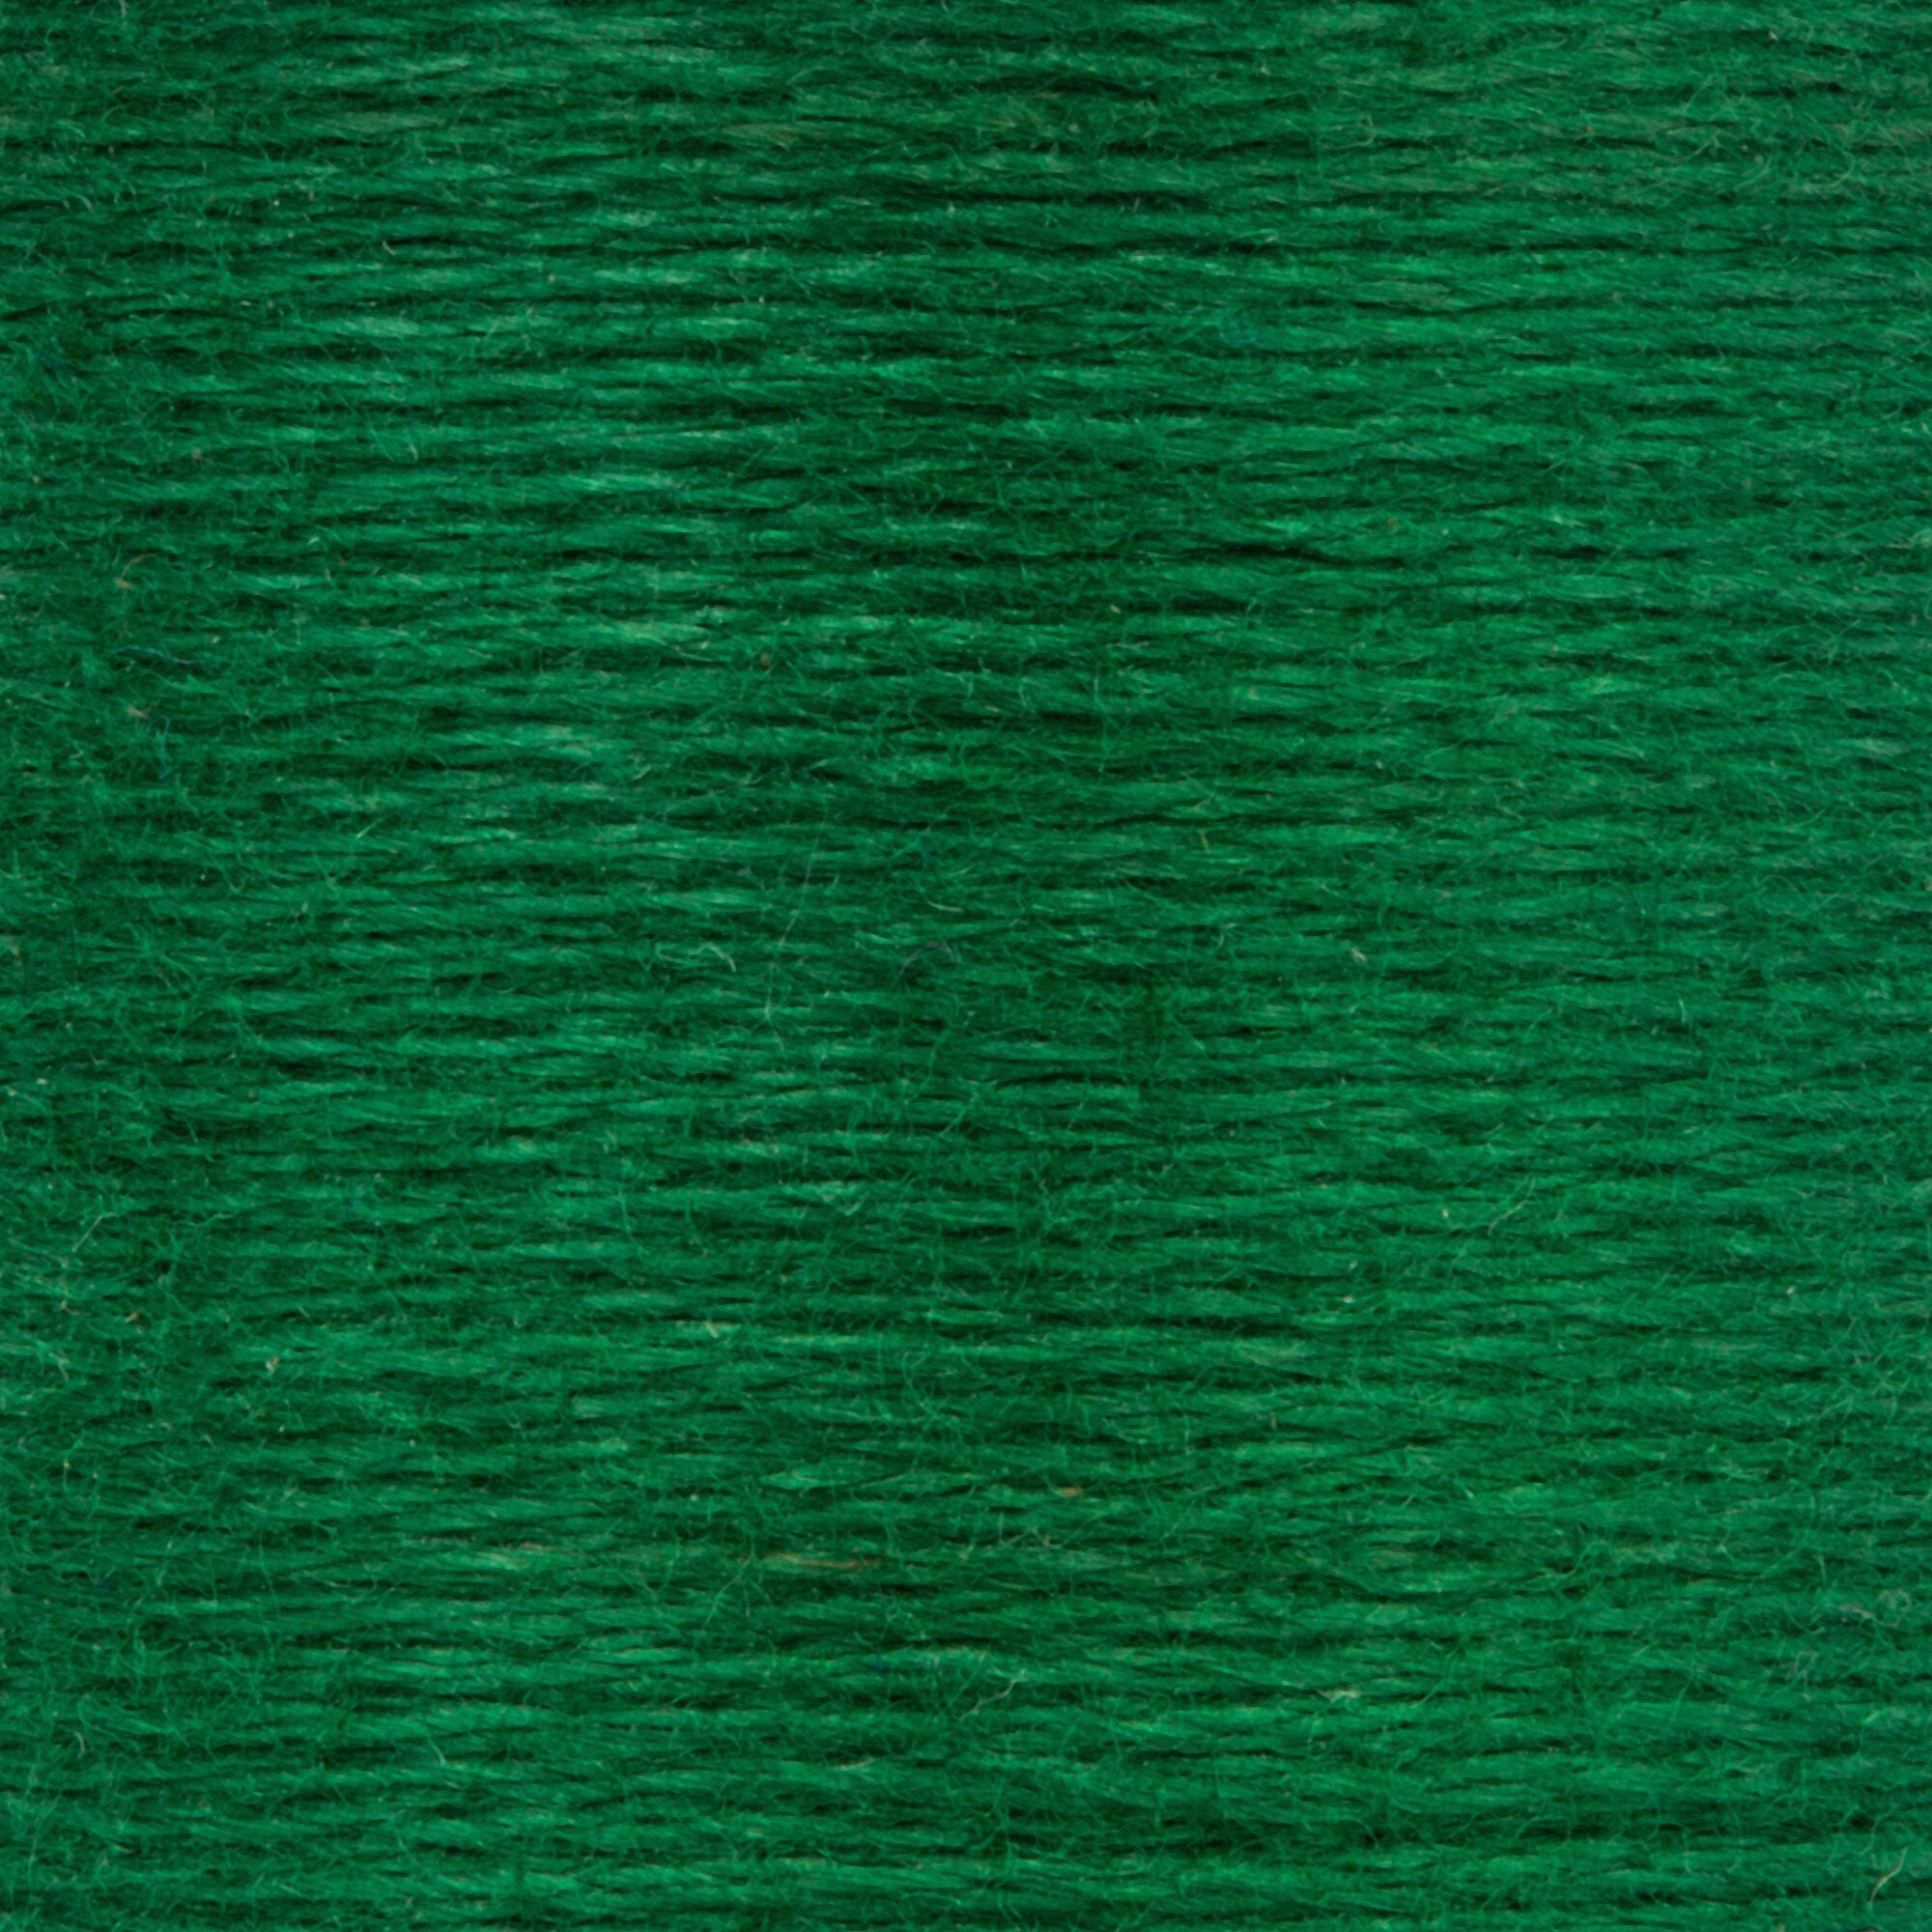 Anchor Embroidery Floss in Grass Green Vy Dk